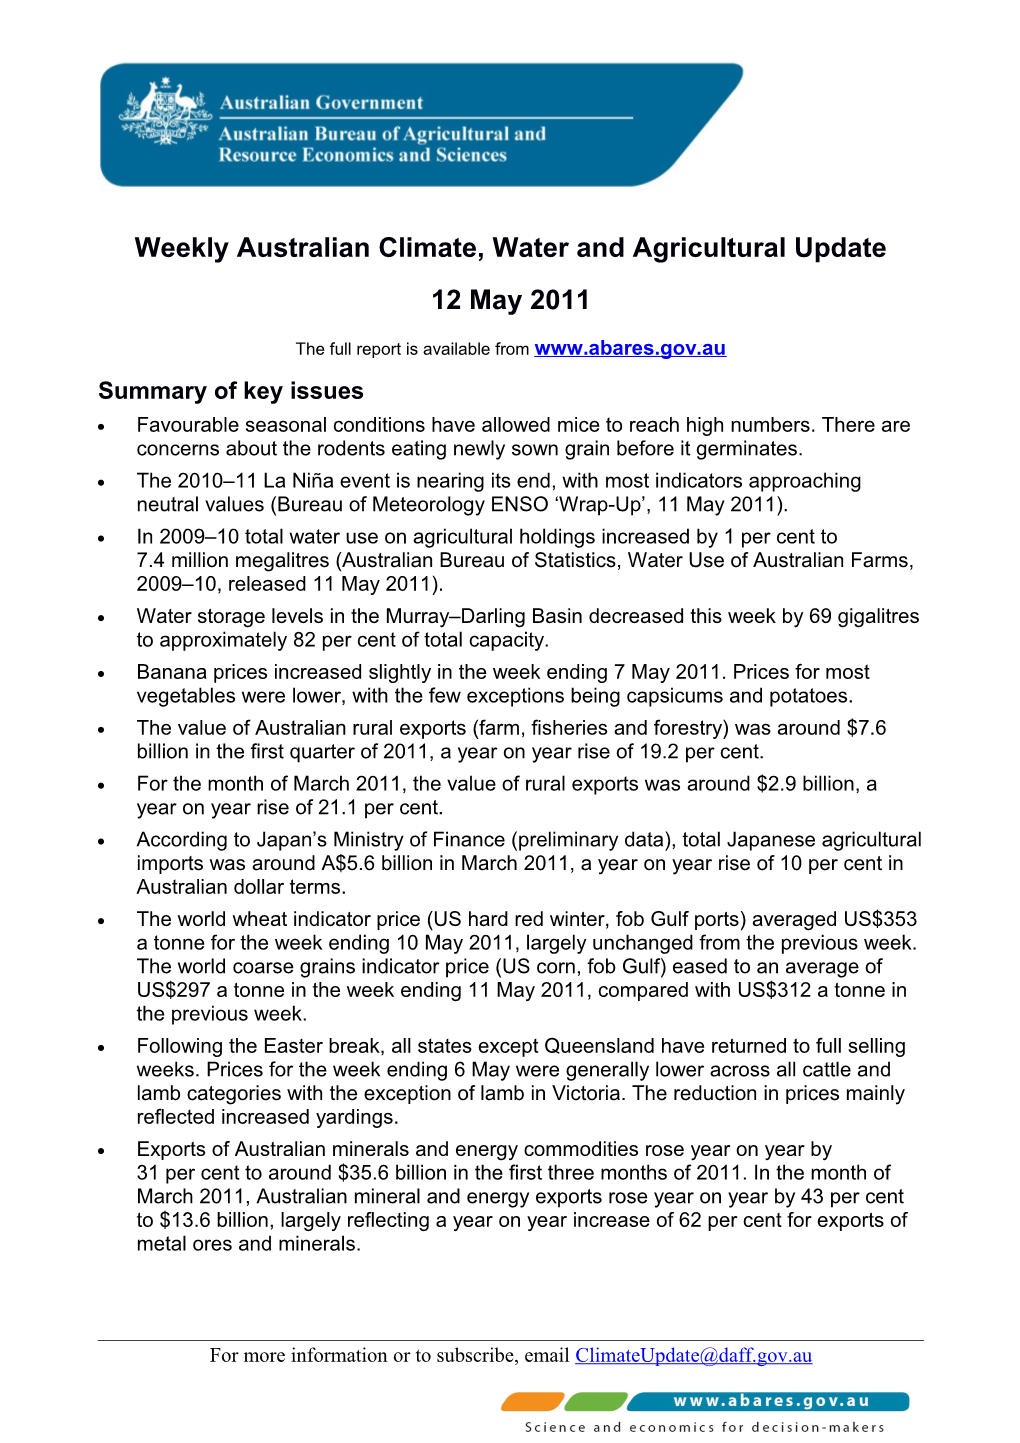 Weekly Australian Climate, Water and Agricultural Update s1